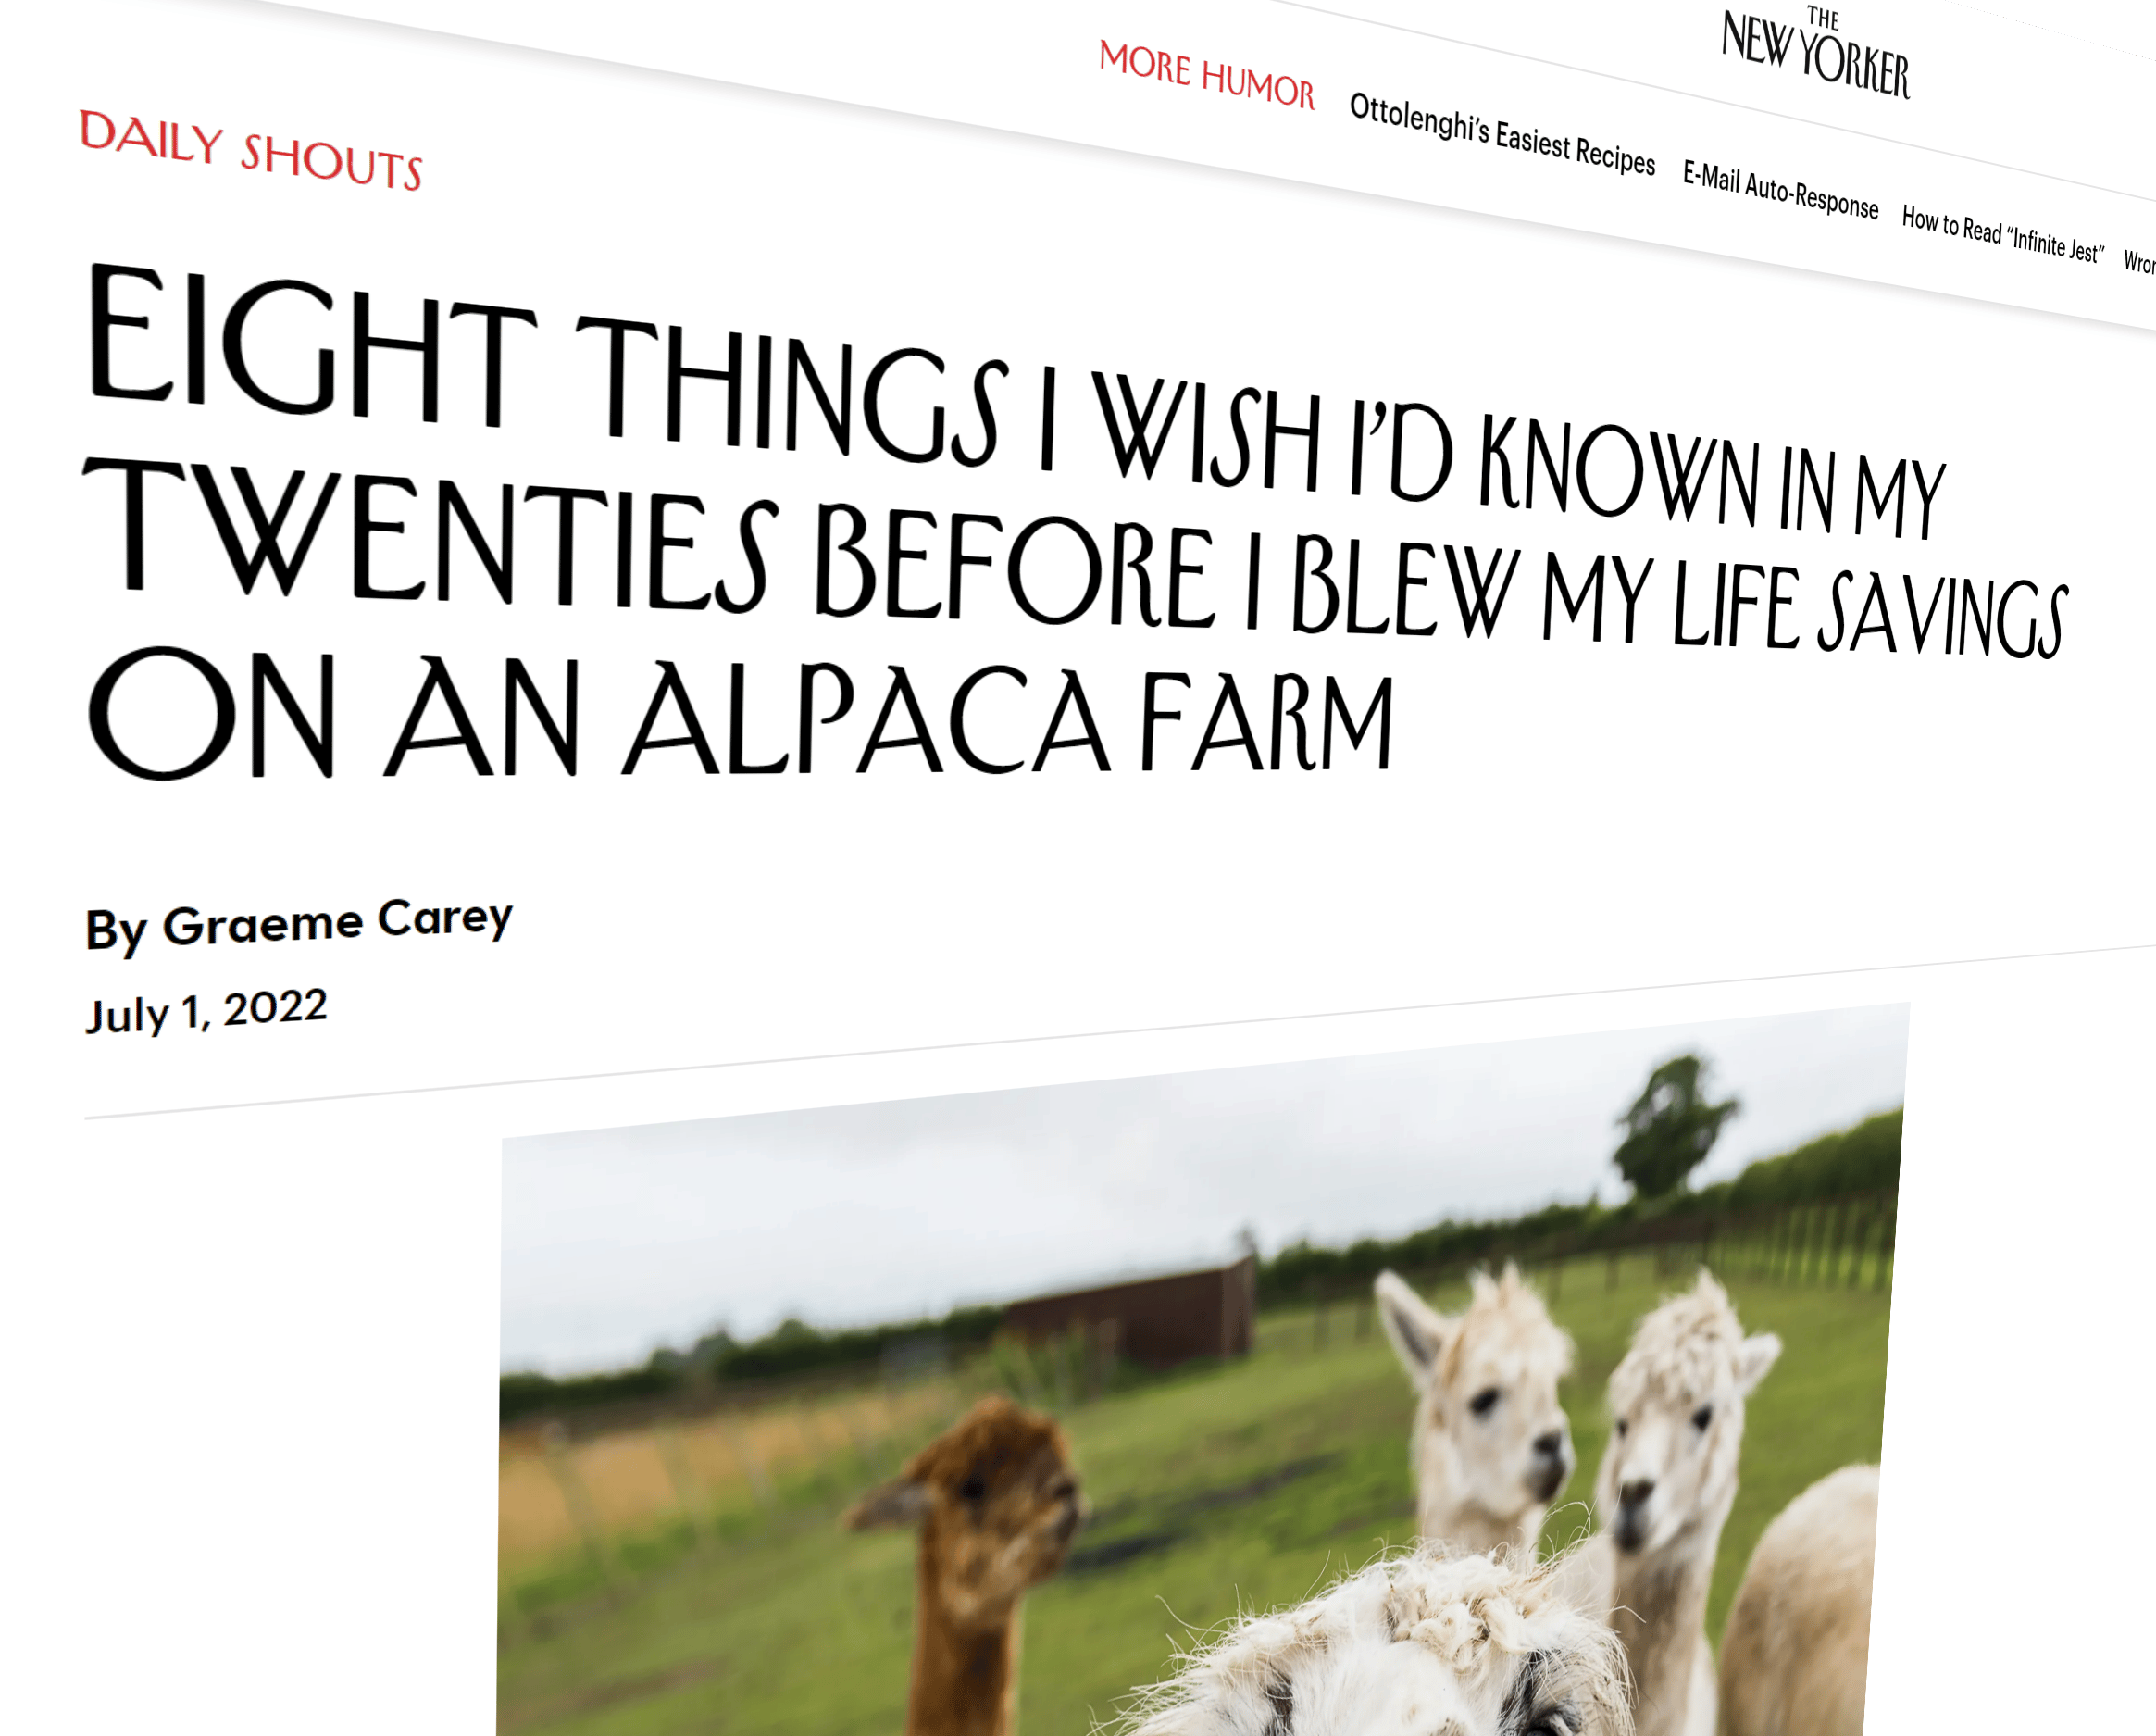 New Yorker article about alpaca farming